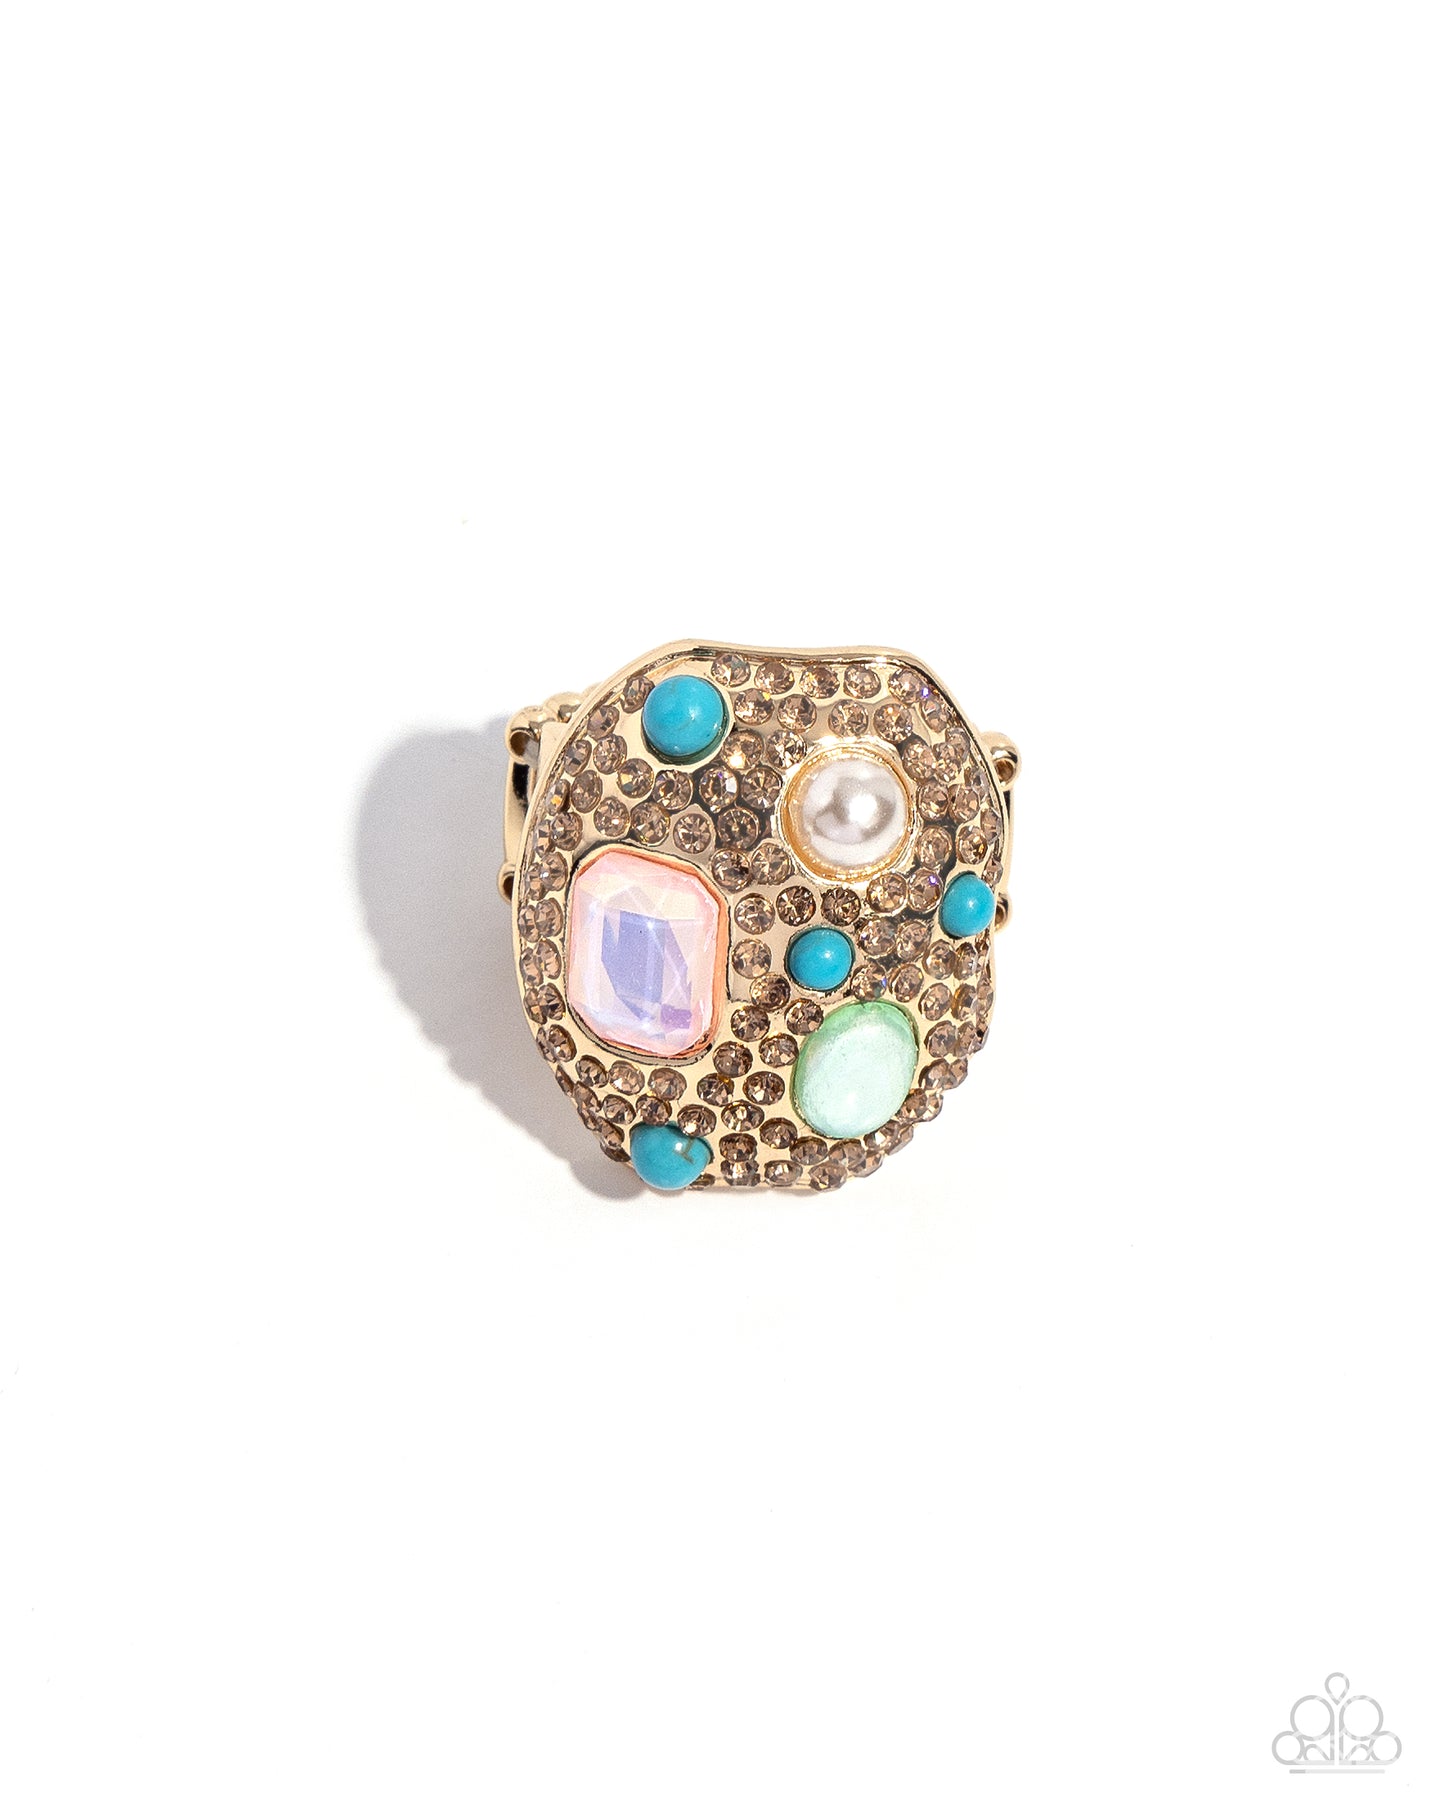 <p>Embellished in light-colored topaz rhinestones, an oval abstract gold ring glitters atop the finger. Turquoise beads, a white pearl, an emerald-cut pink iridescent gem, and a green opalescent oval bead create additional color and shine. Features a stretchy band for a flexible fit. Due to its prismatic palette, color may vary.</p> <p><i> Sold as one individual ring.</i></p>